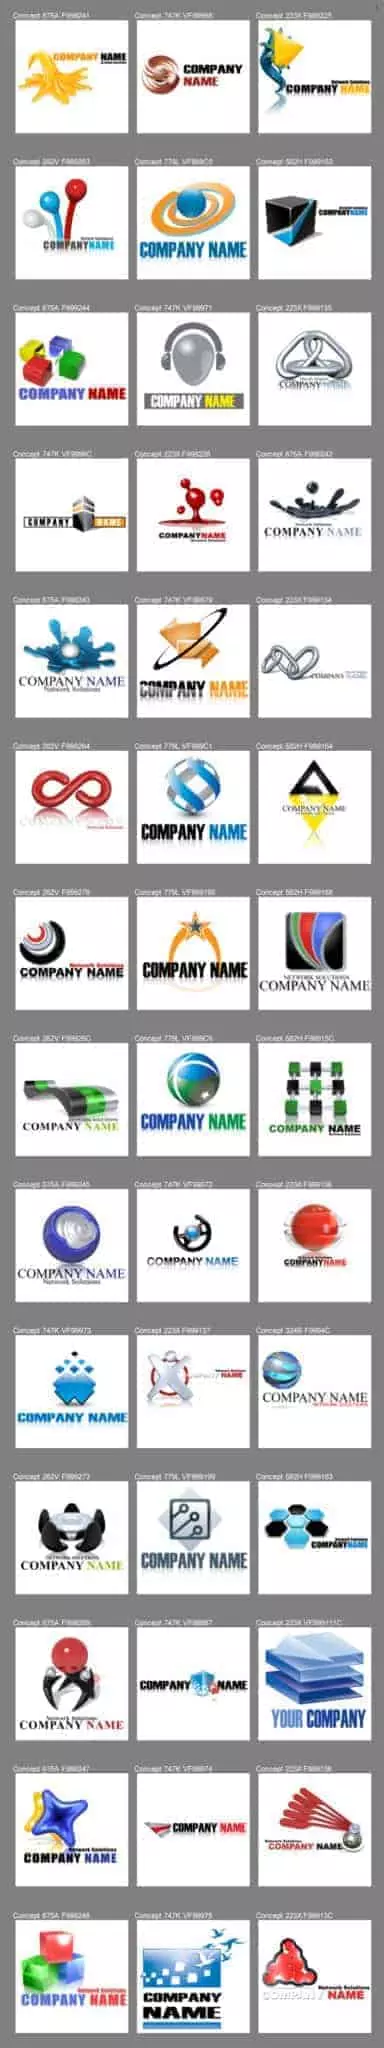 our experts show examples of a great brand logo 4